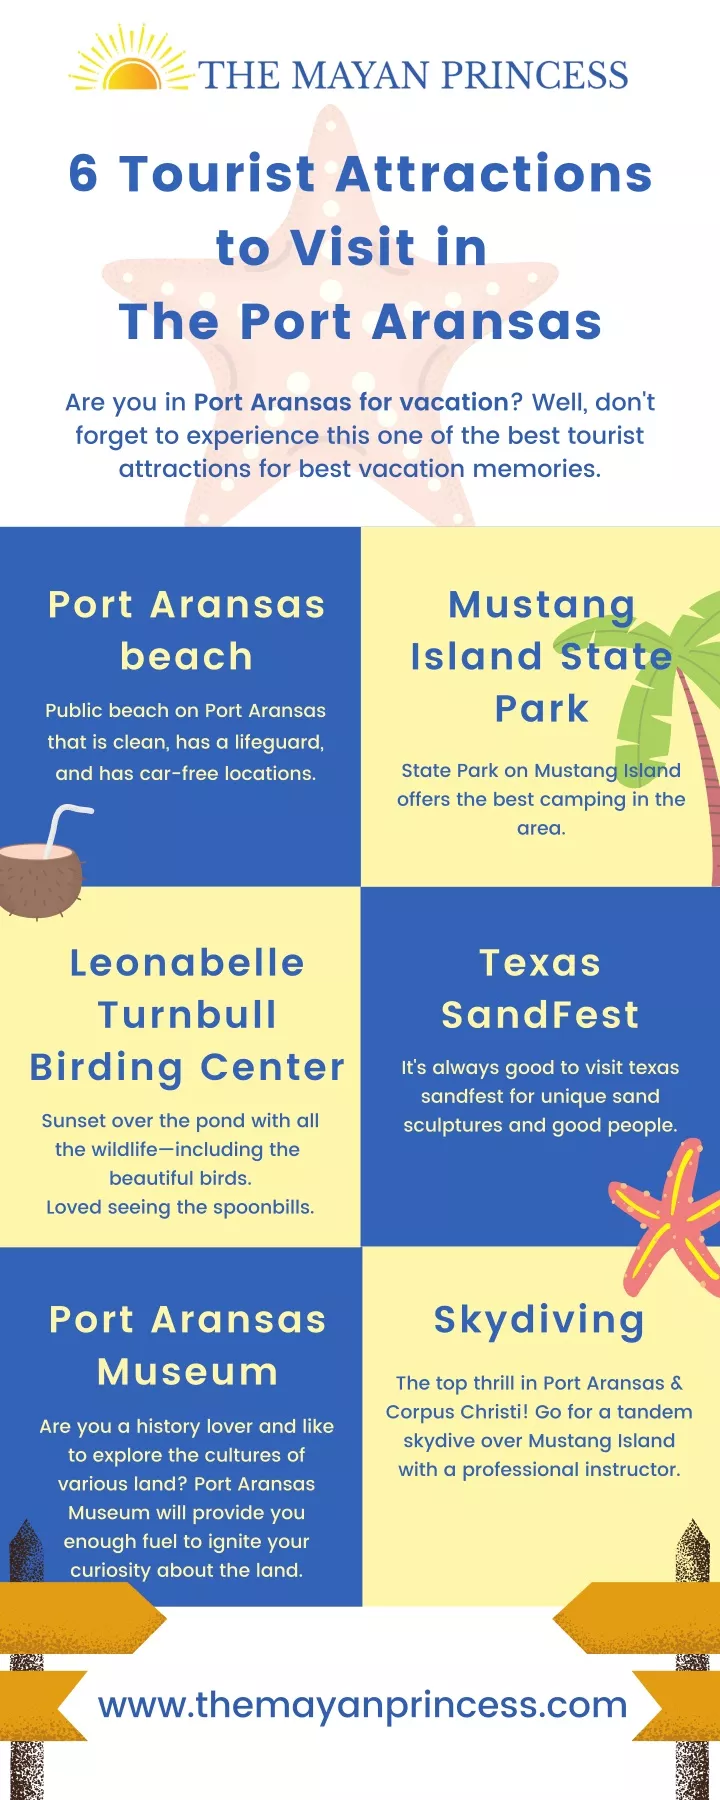 6 tourist attractions to visit in the port aransas